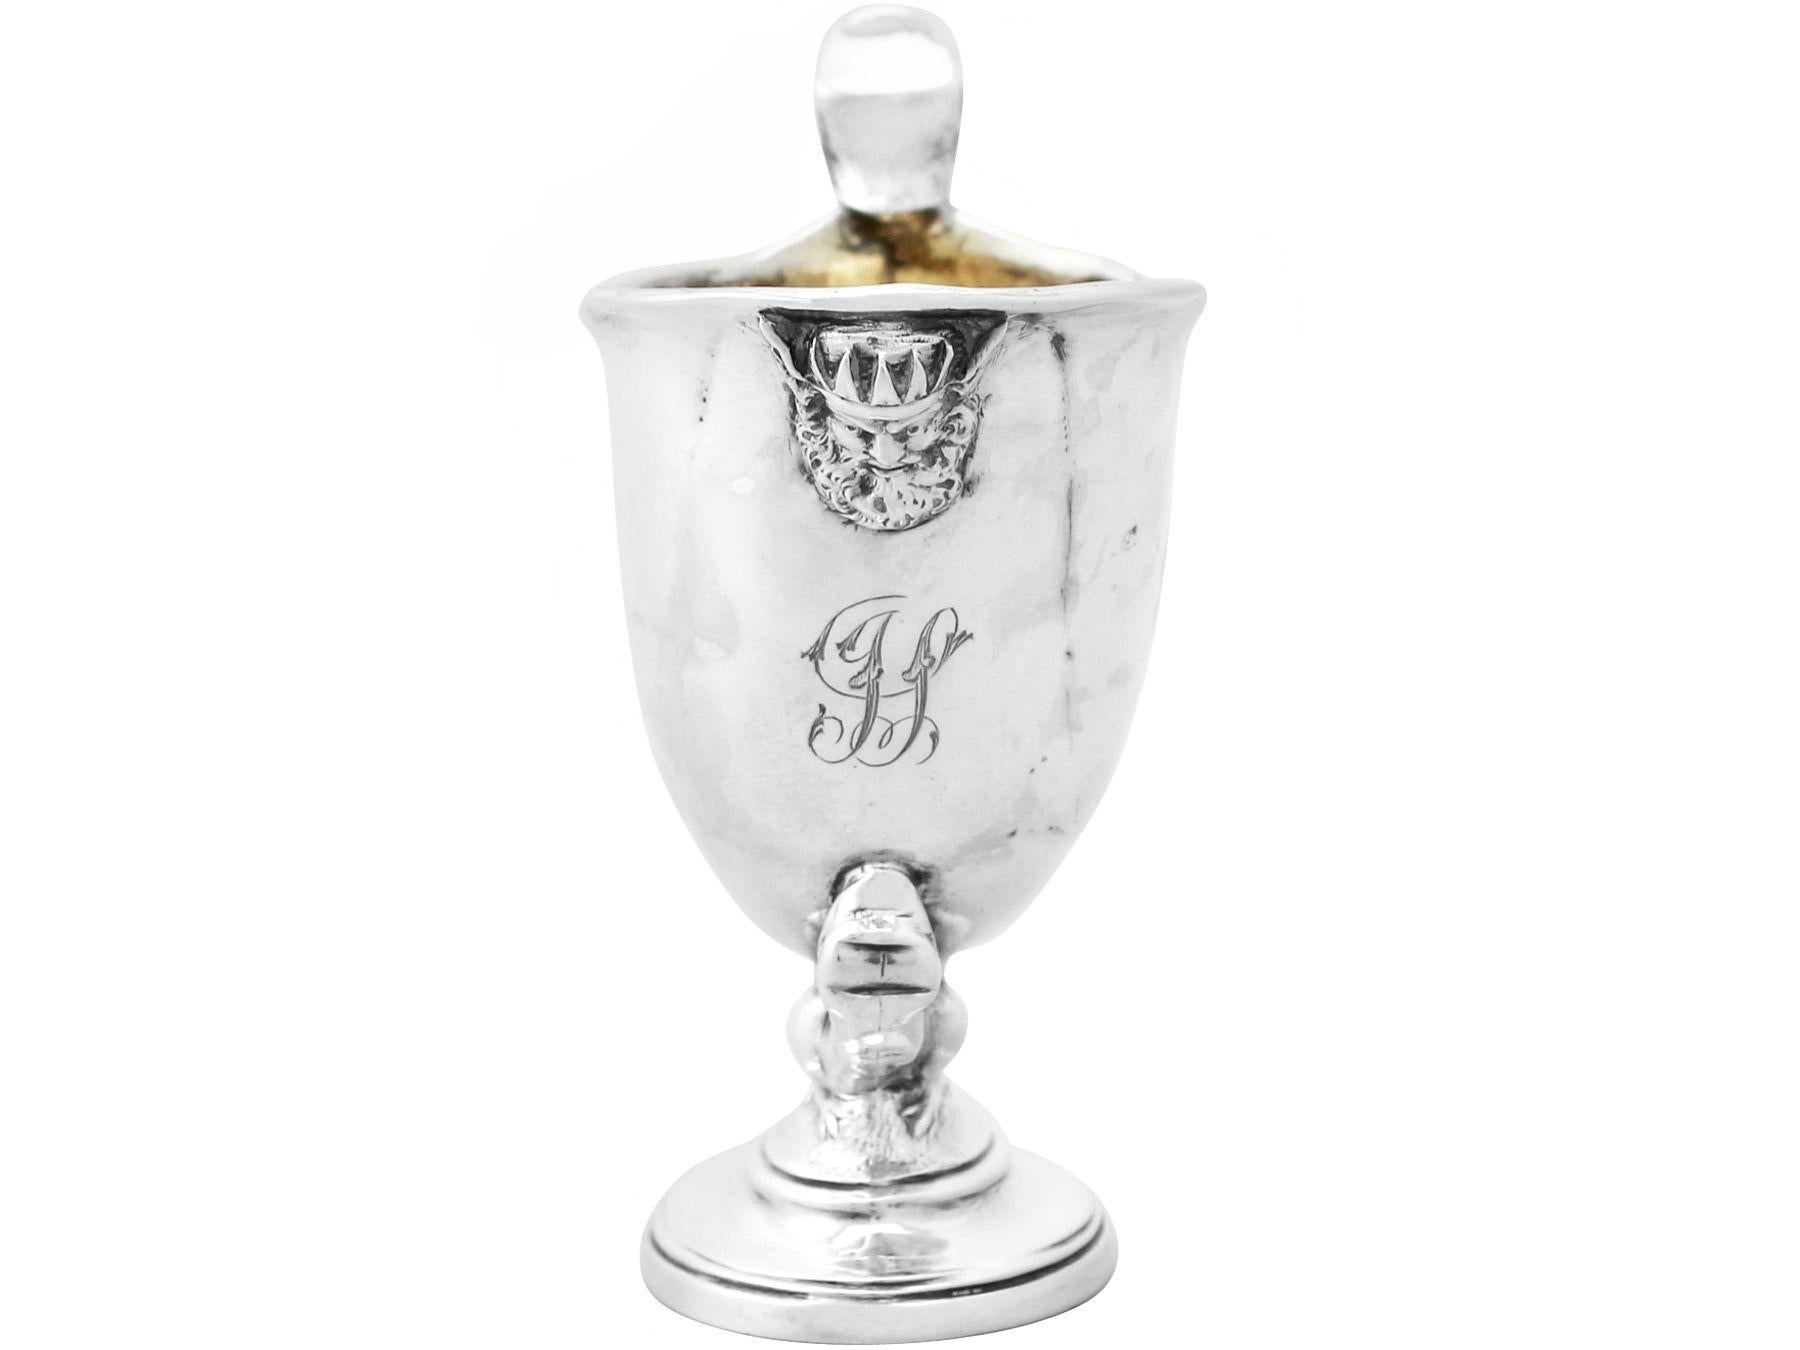 An exceptional, fine and impressive antique Victorian English sterling silver cream jug made by John Hunt & Robert Roskell; an addition to our silver teaware collection.

This exceptional antique Victorian sterling silver cream jug has an oval